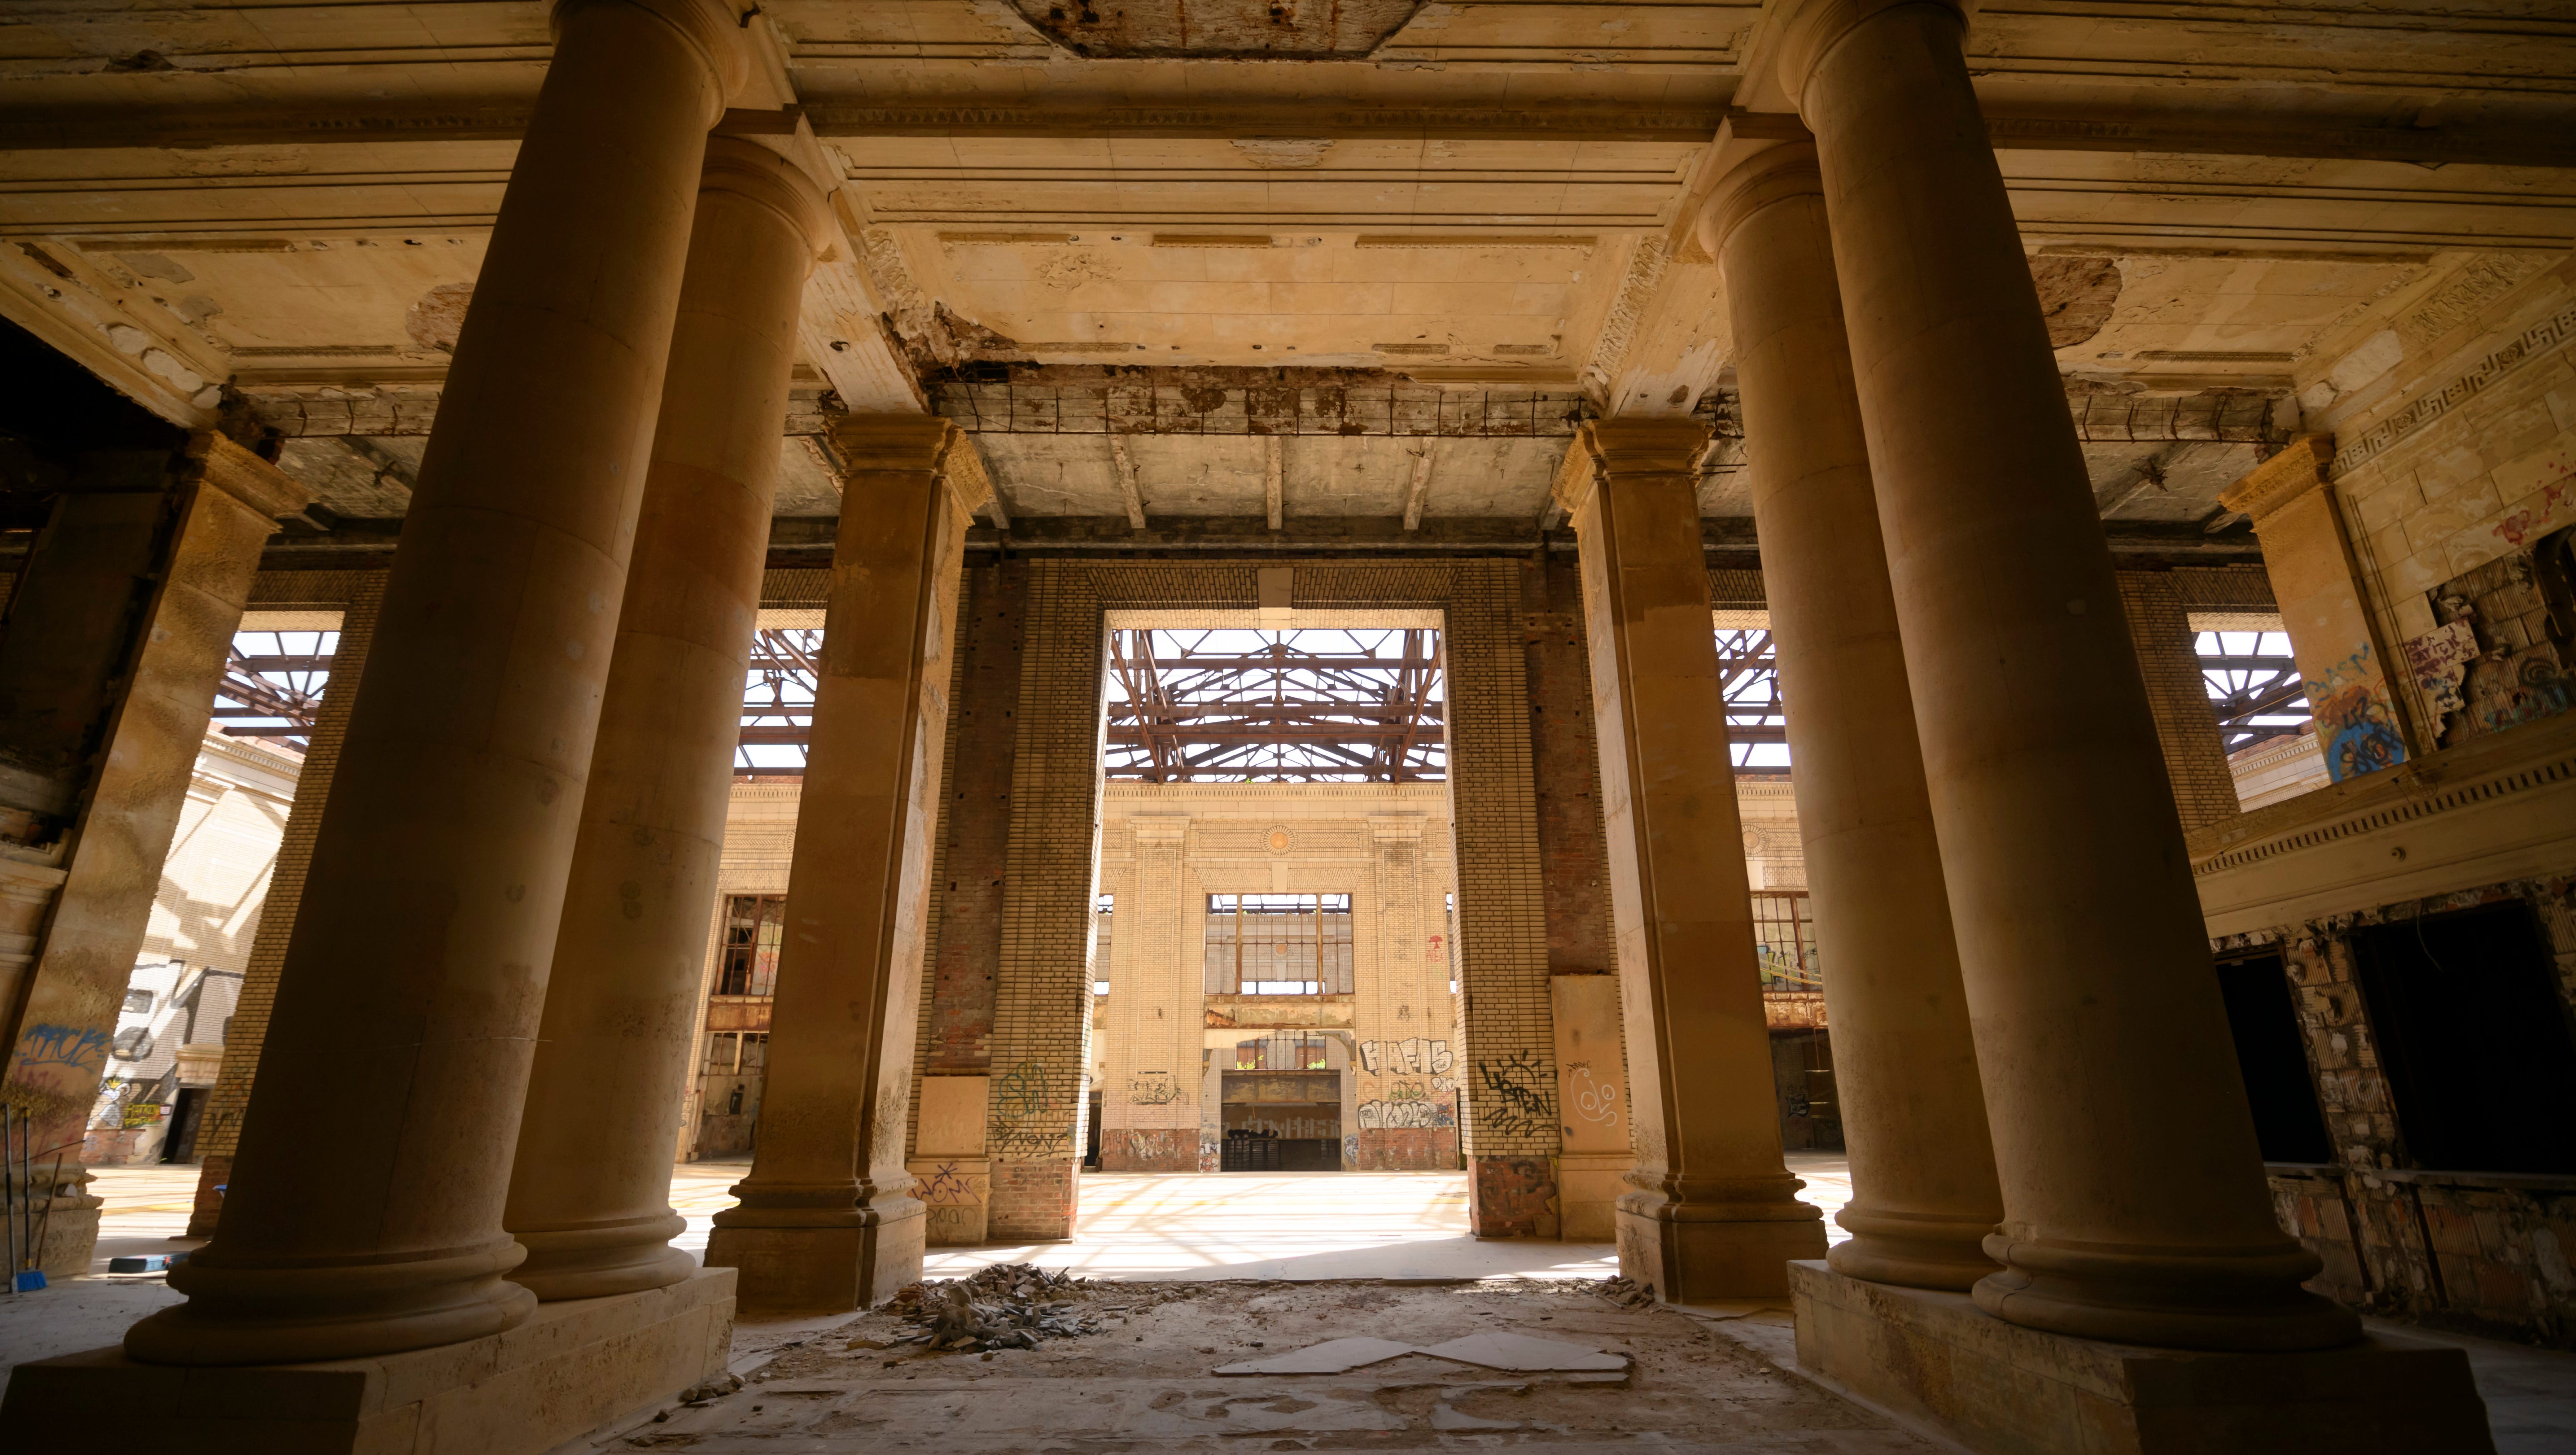 The Corktown outpost is meant to supplement Ford's work on its Dearborn campus, and it will use a portion of the undisclosed dollar amount Ford set aside in 2016 to accomplish that redesign. The lobby of the Michigan Central Depot train station.